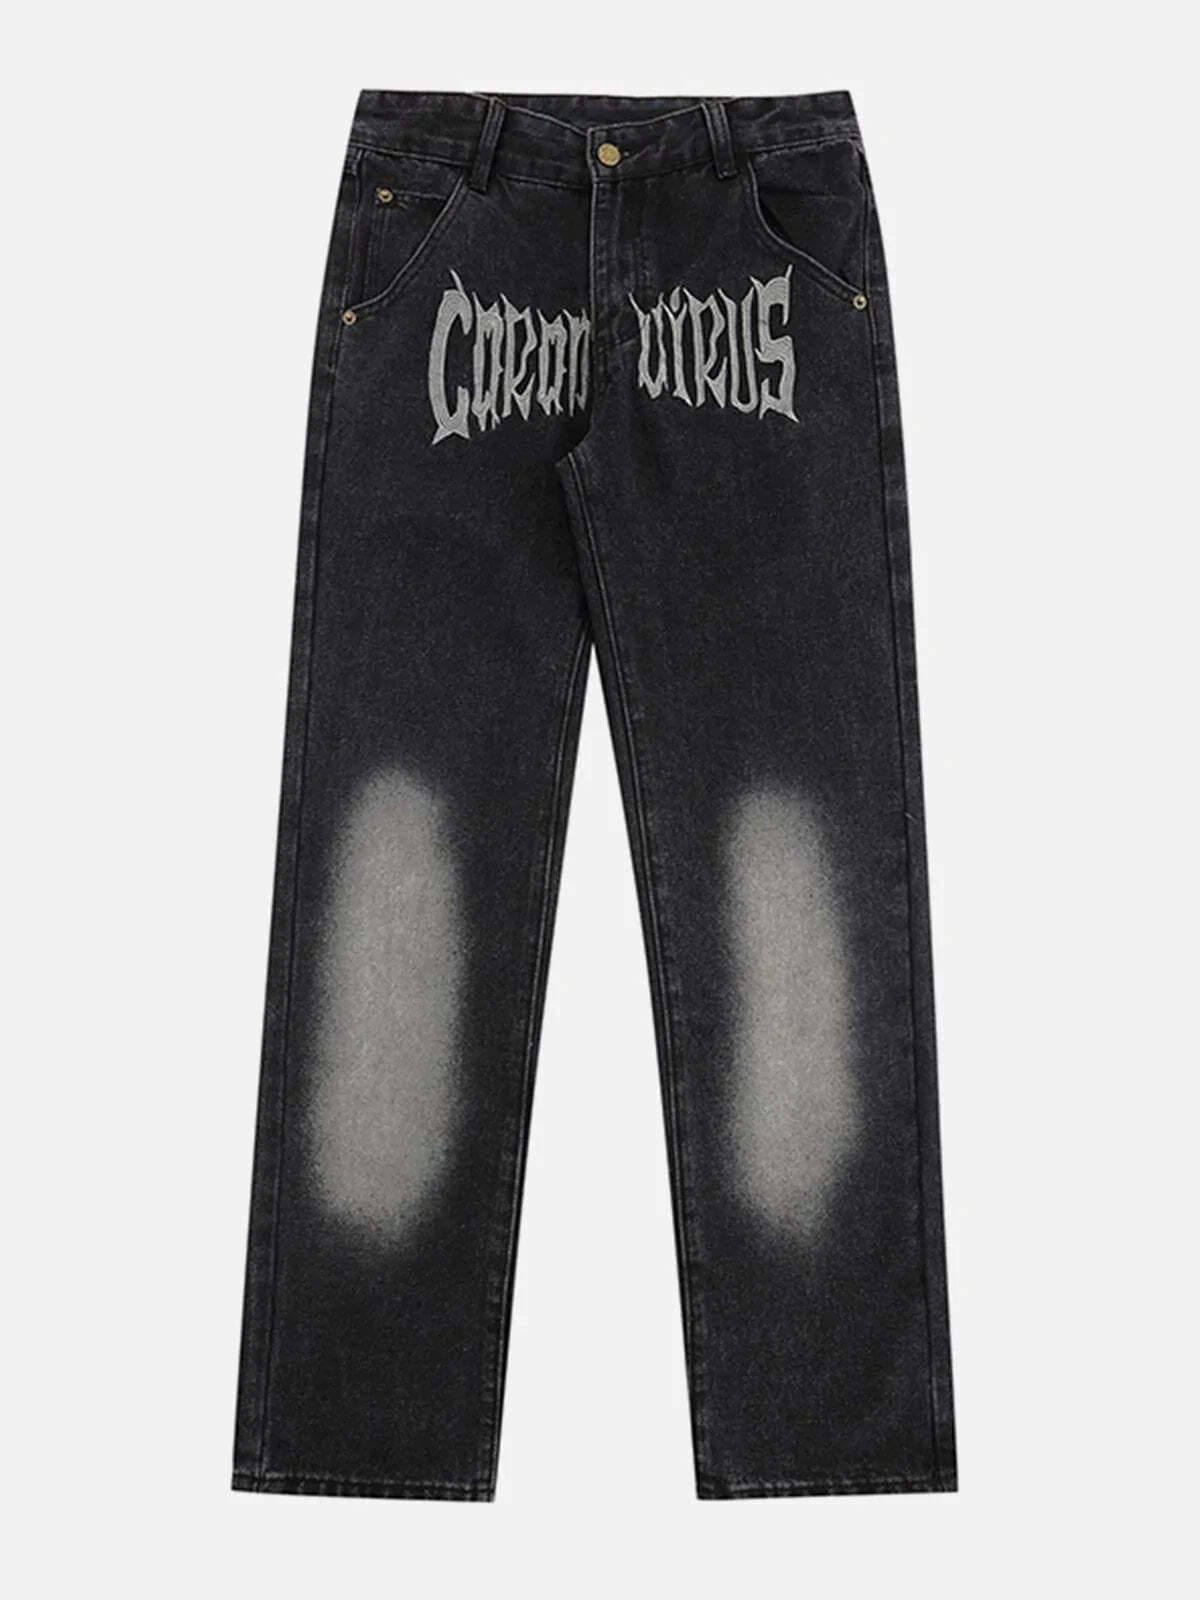 vintage bat embroidered jeans distressed & edgy 2367